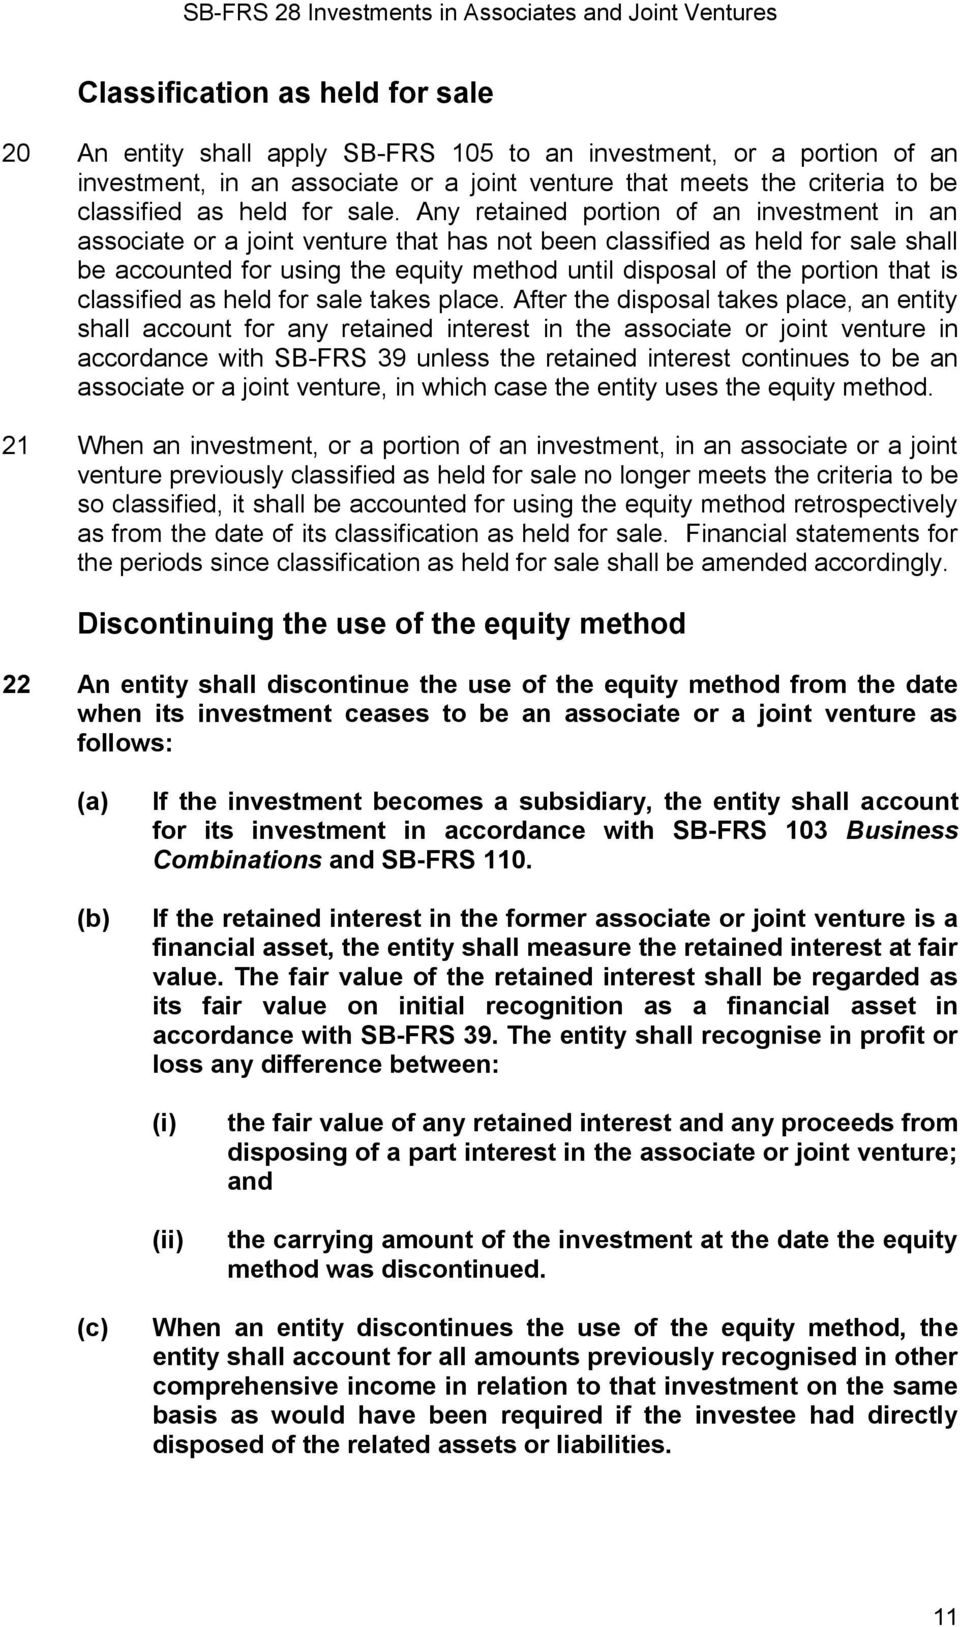 Any retained portion of an investment in an associate or a joint venture that has not been classified as held for sale shall be accounted for using the equity method until disposal of the portion